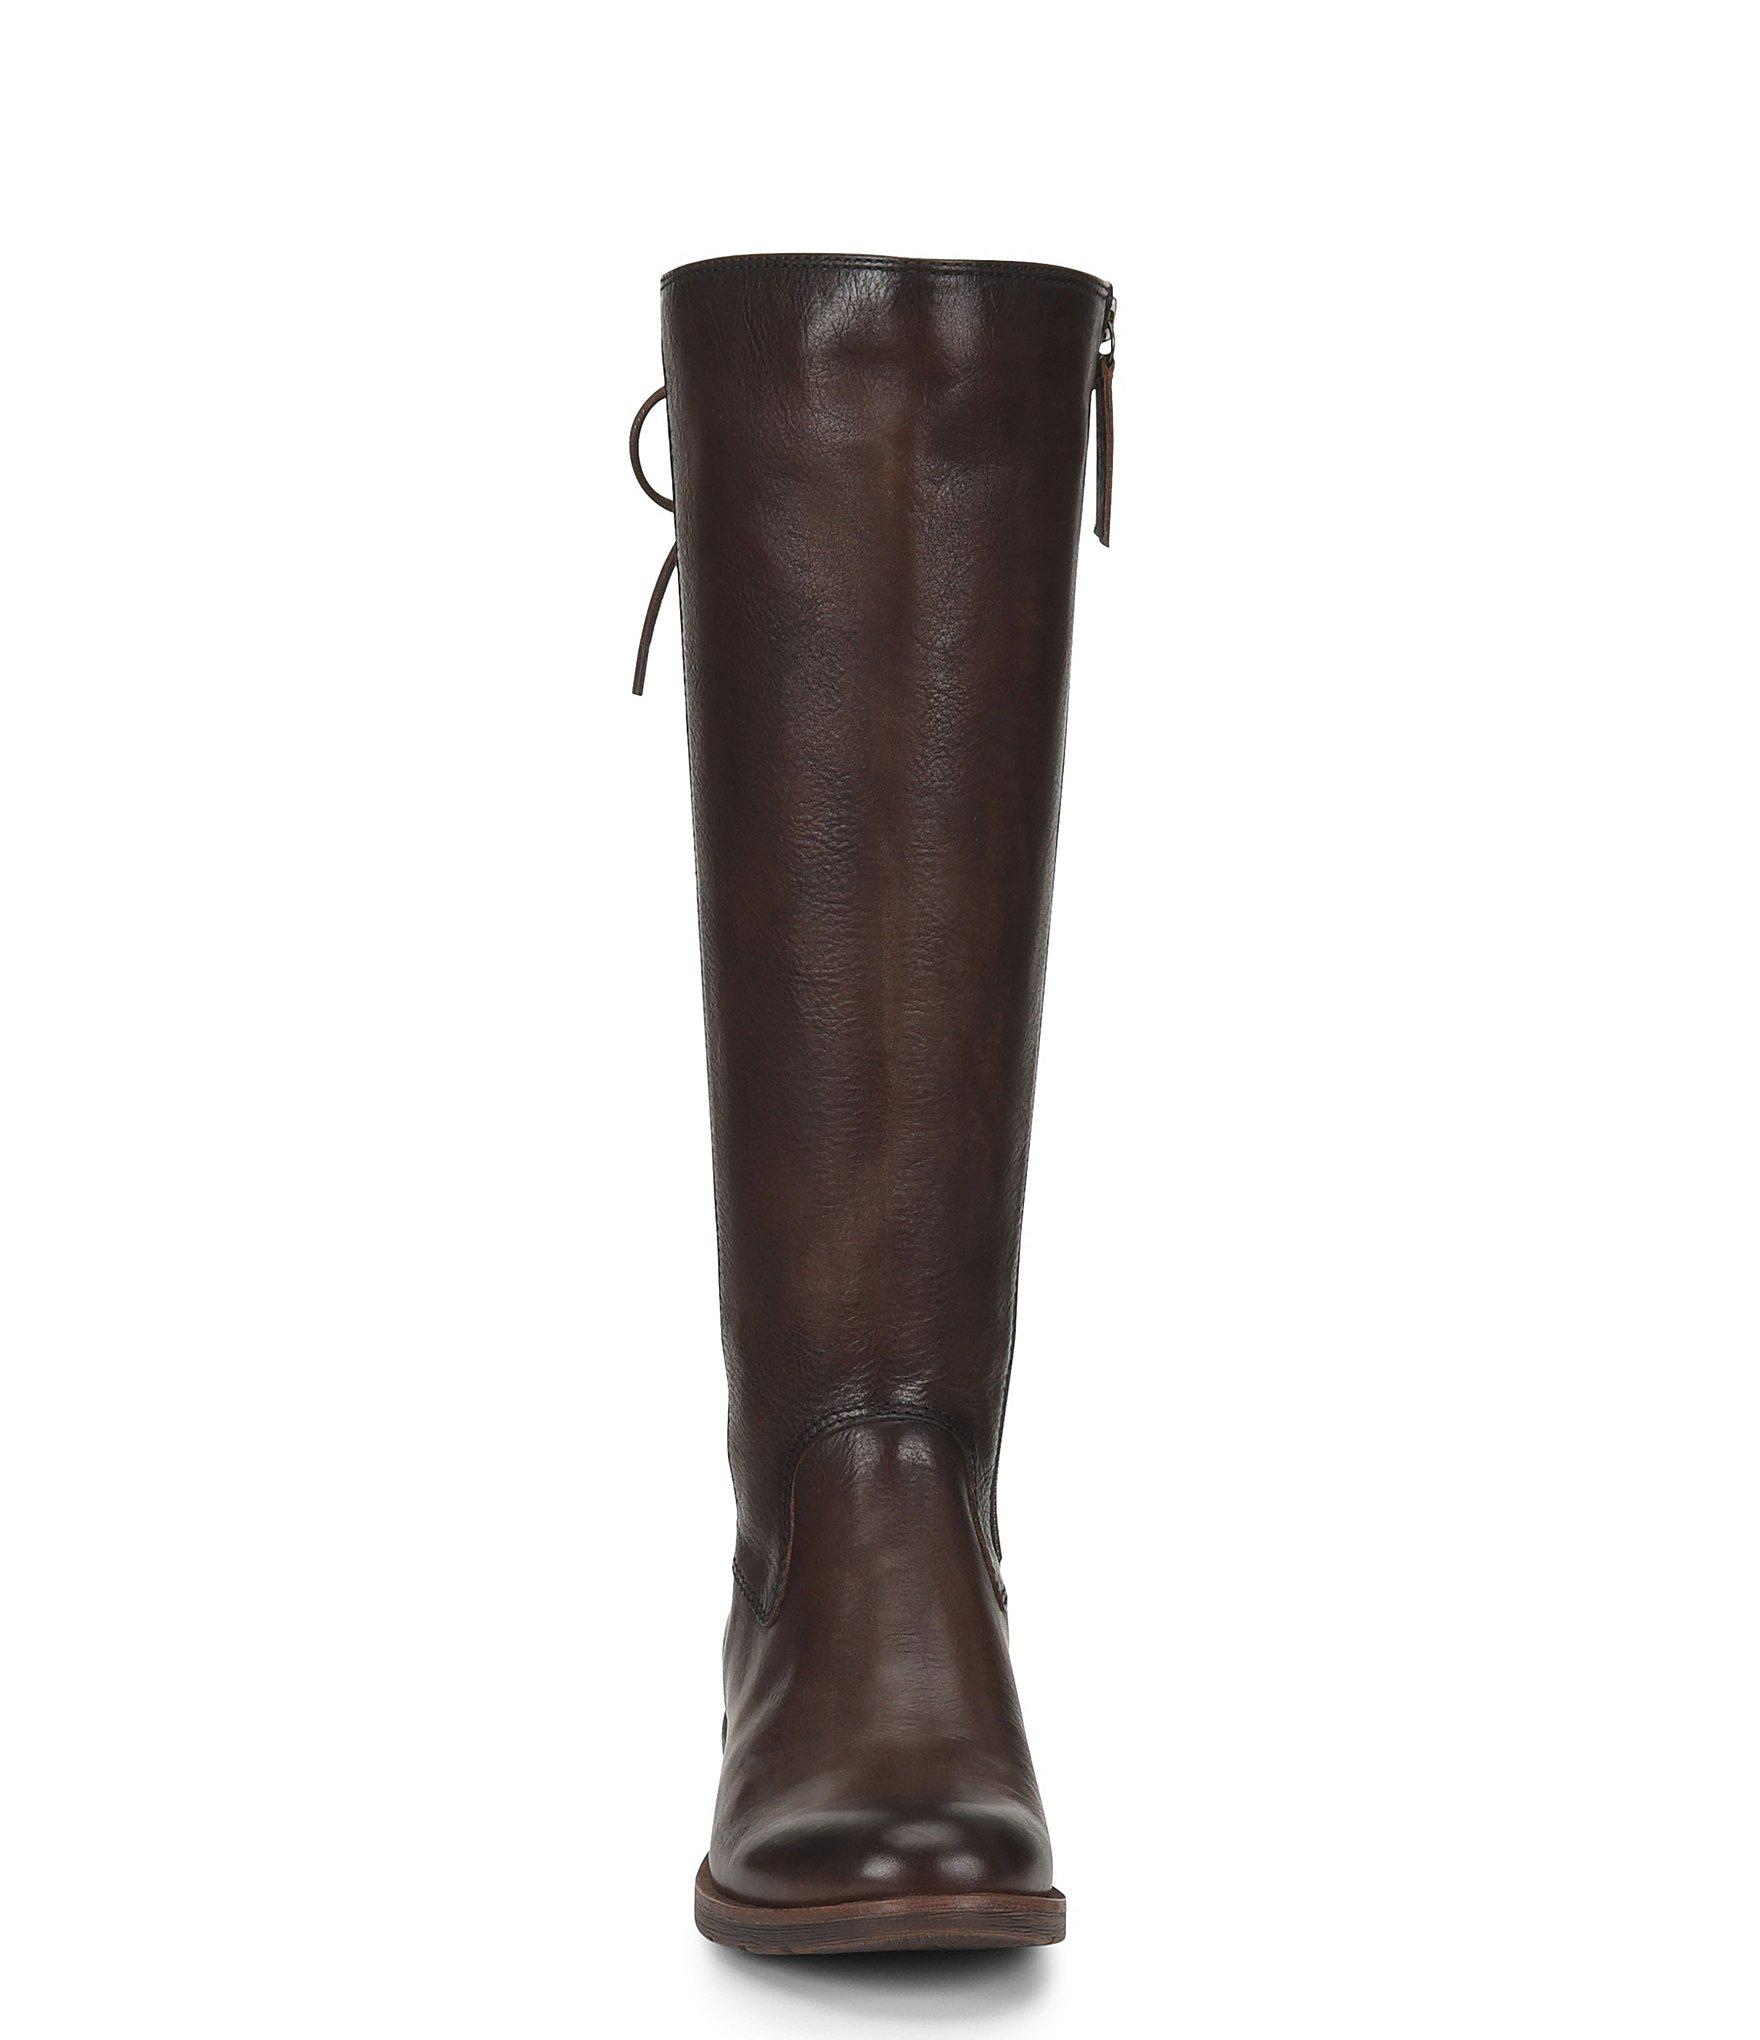 Söfft Sharnell Ii Tall Leather Riding Boots in Brown - Lyst